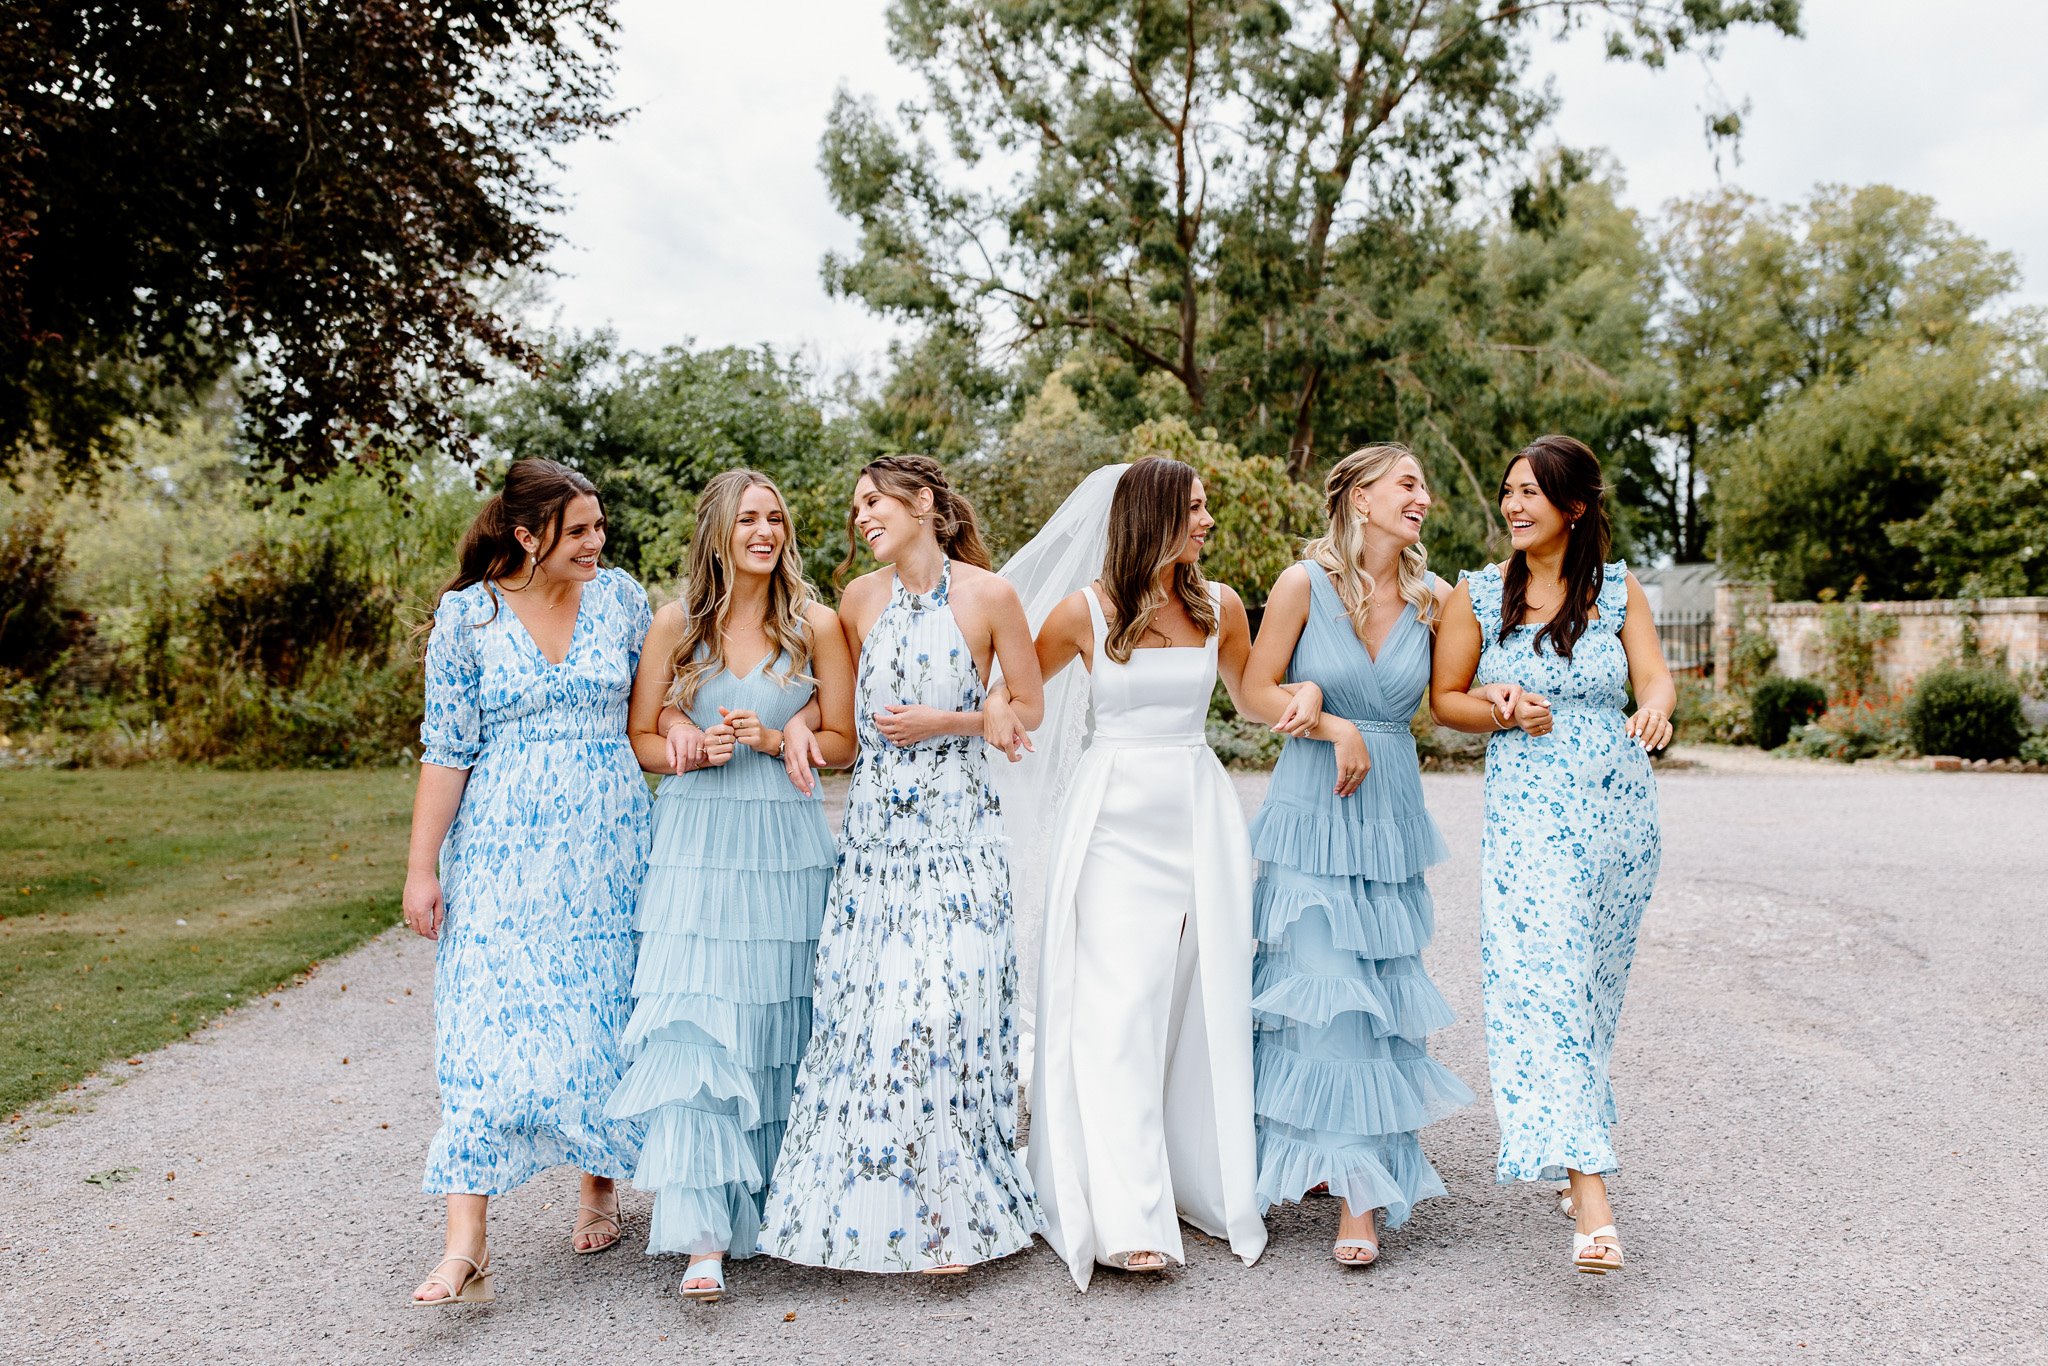 Every shade of blue, two dresses & two ceremonies 